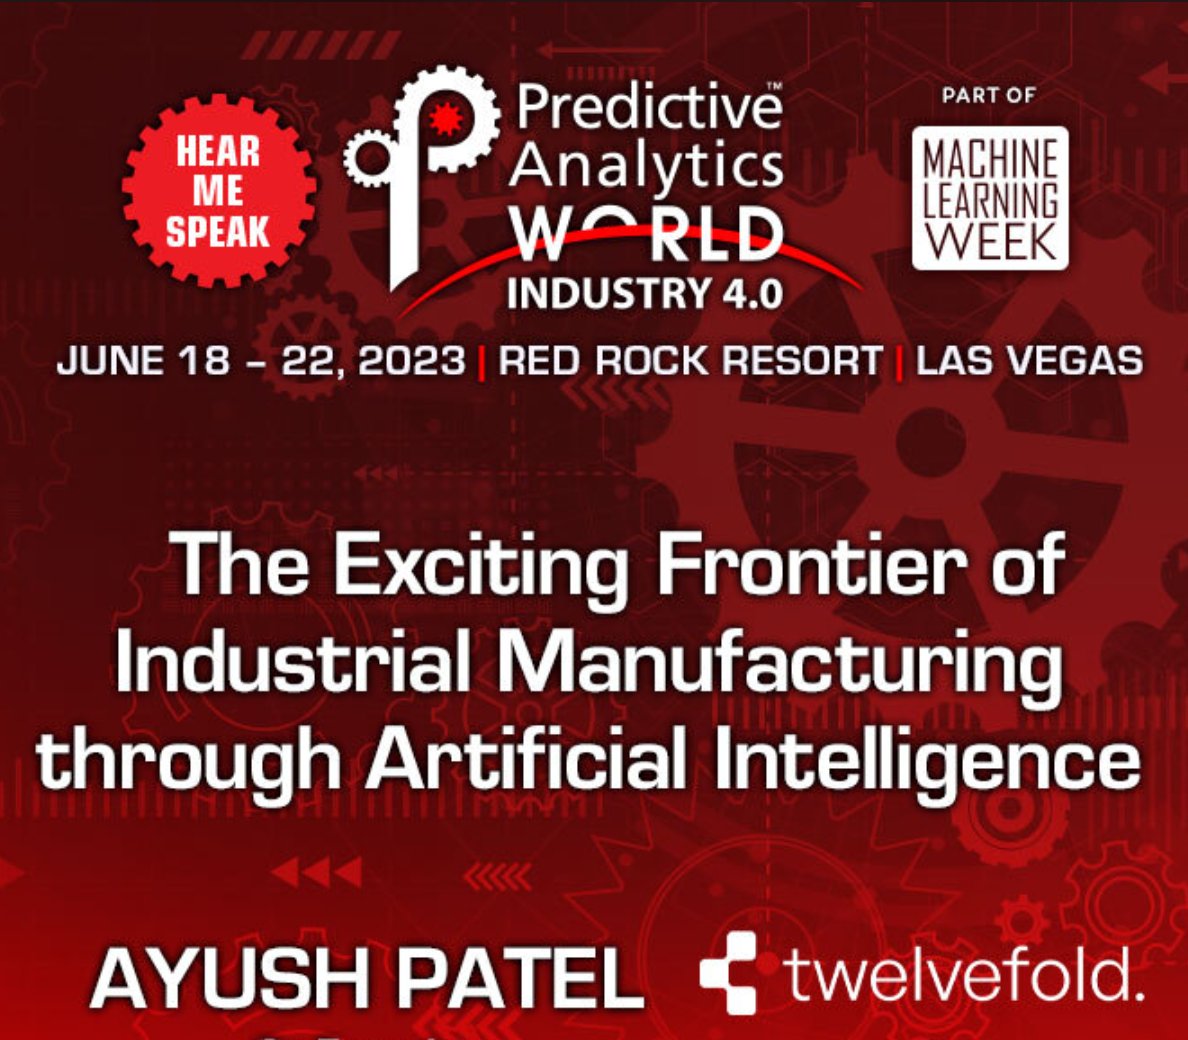 Excited to speak at the #MLWeek in Vegas next month on how Generative AI is key to unlocking a new era of autonomous production in Manufacturing for fine-grained control and minimized operations cost!

rb.gy/geuqg

Interested in joining? Message me for a promo code.